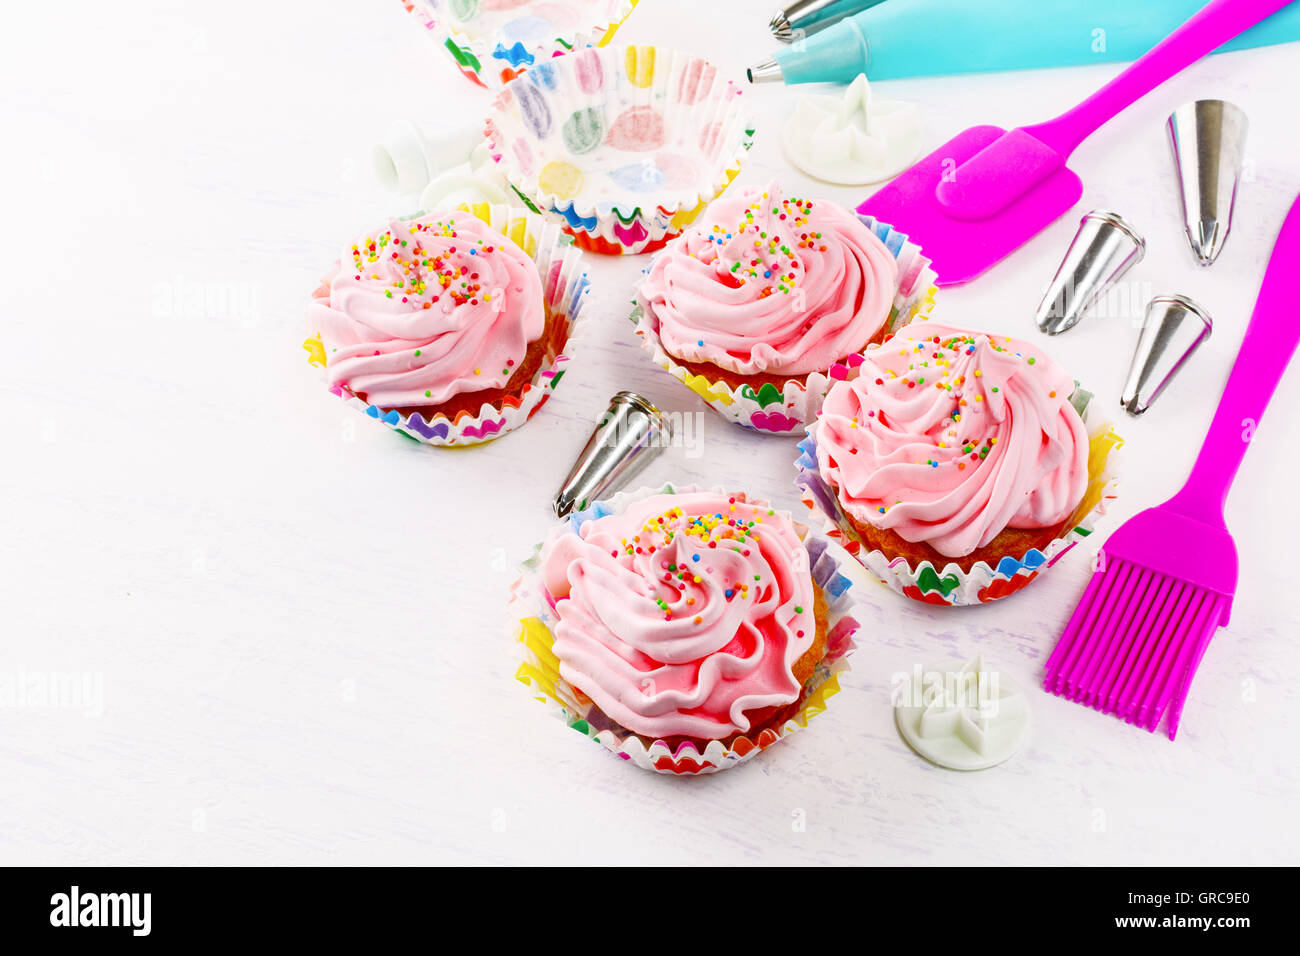 Decorated birthday cupcakes and cookware background. Birthday cupcake with pink whipped cream. Homemade party cupcakes. Stock Photo